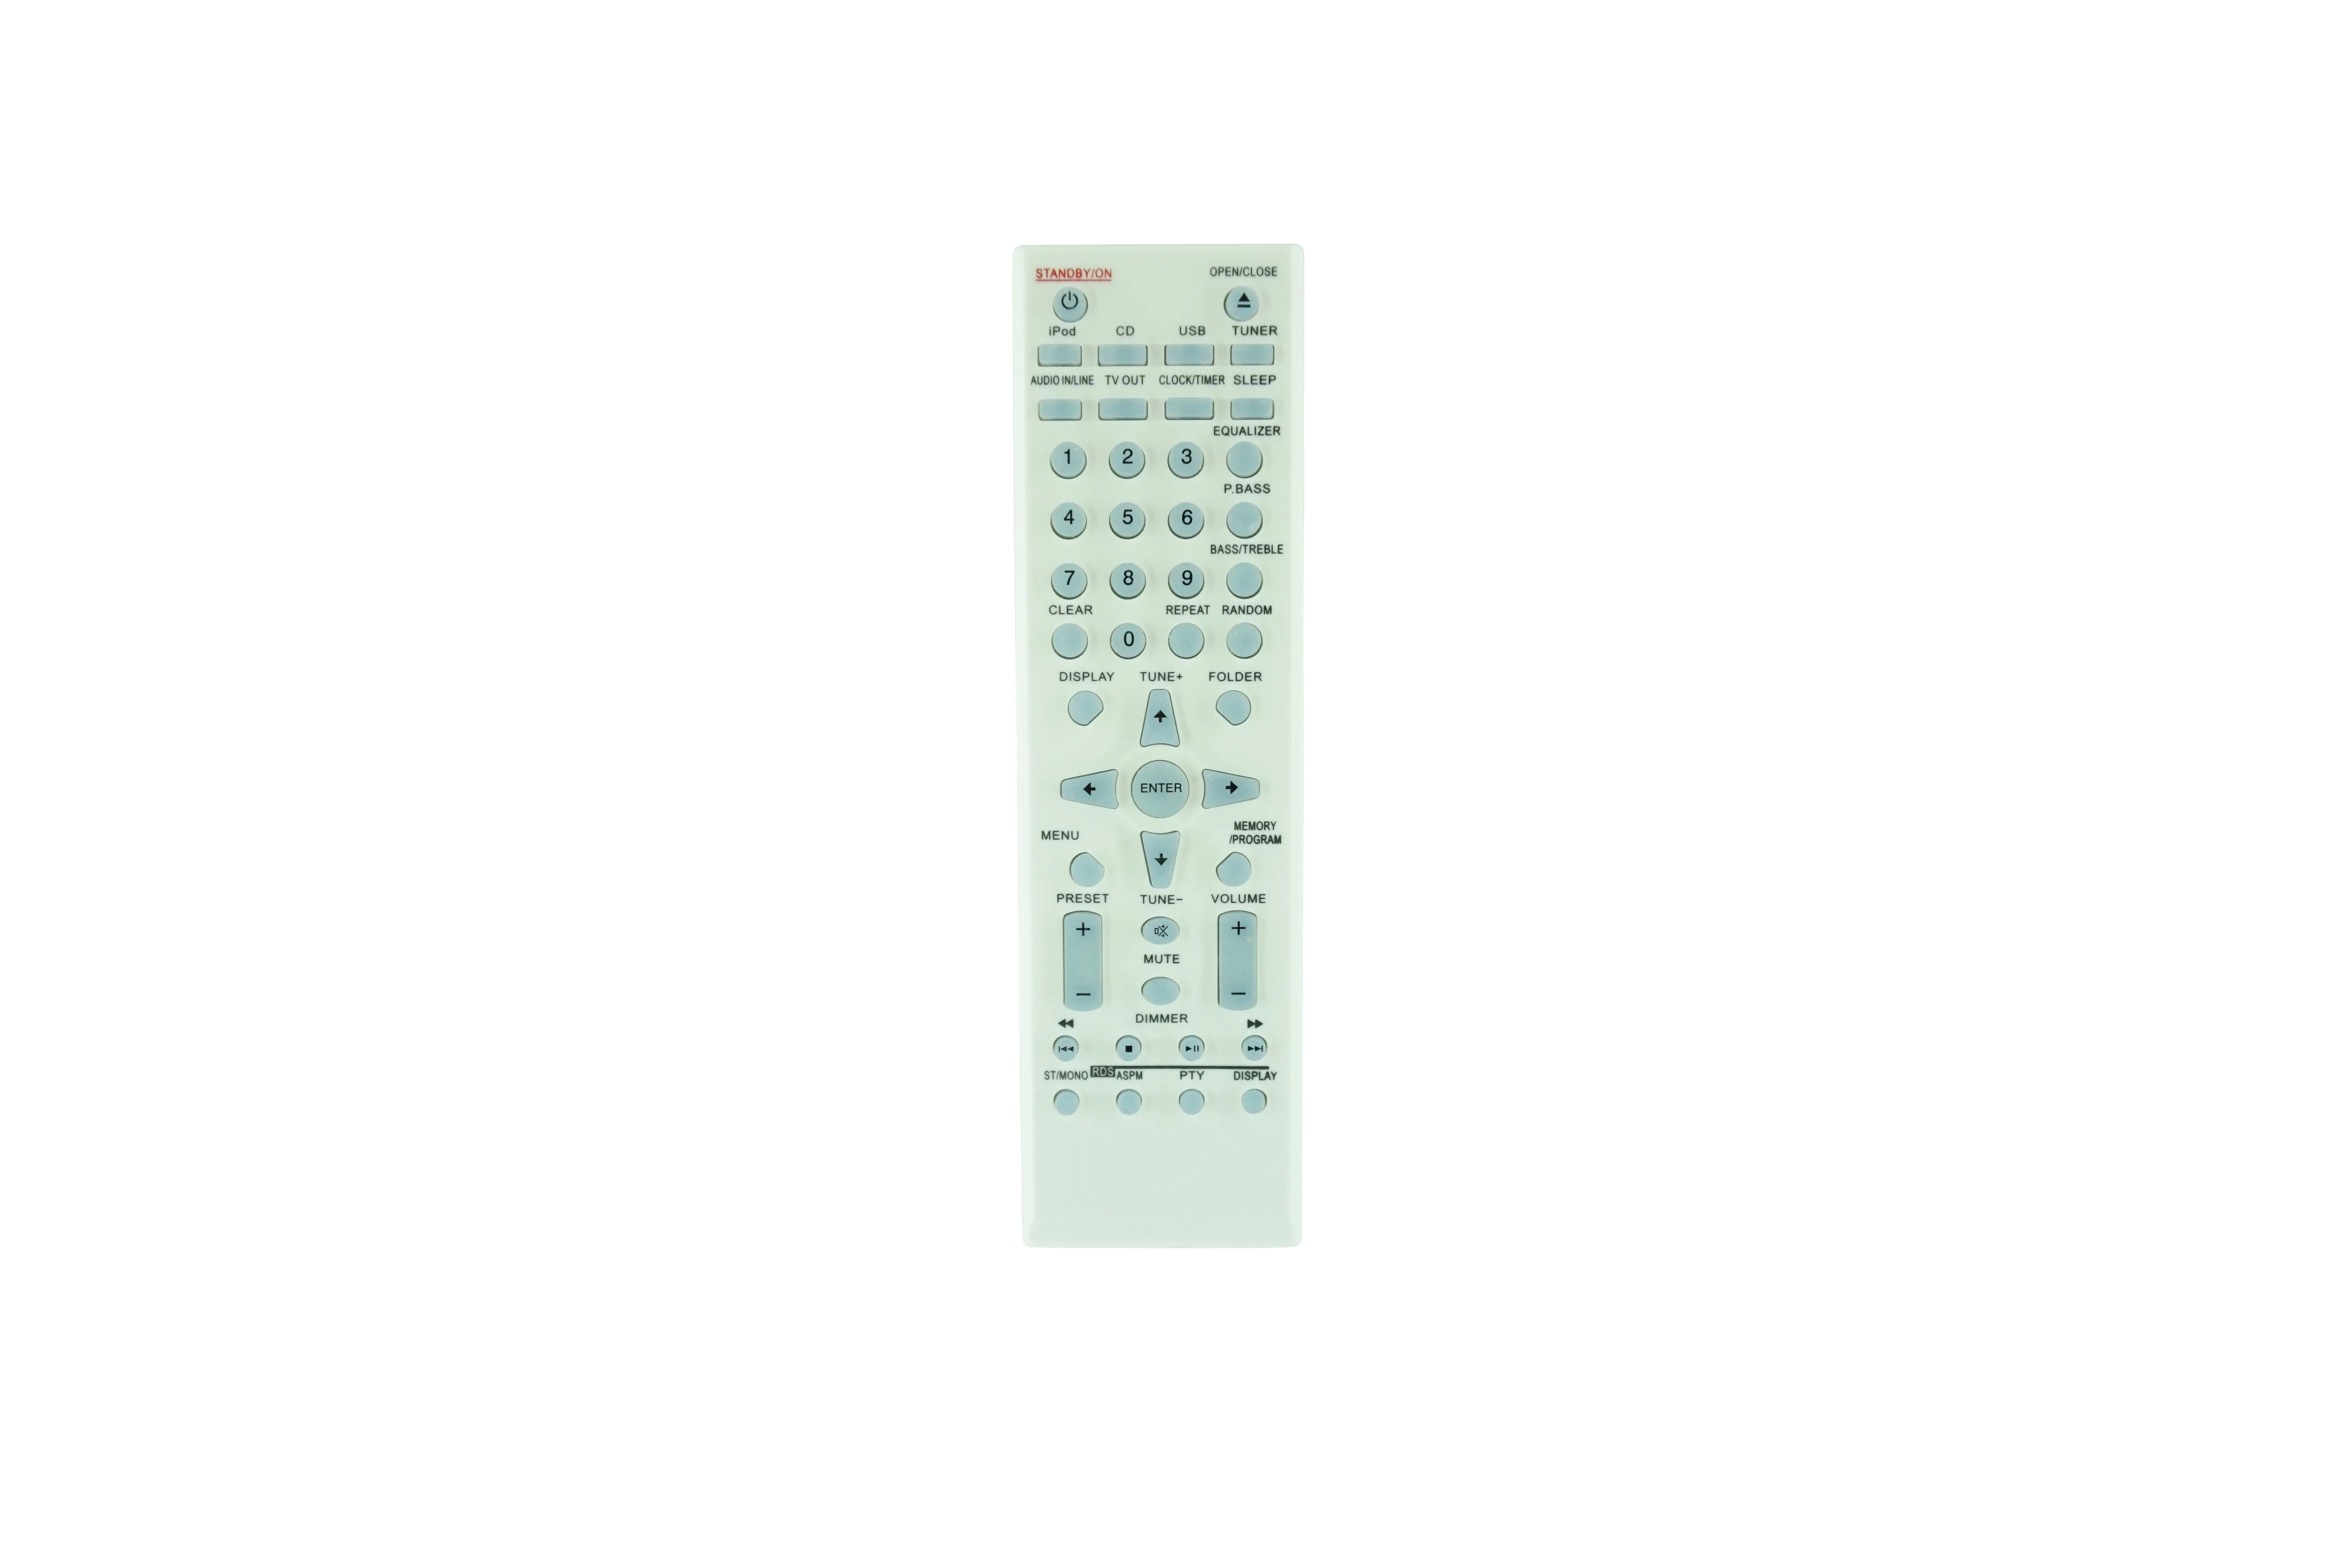 Remote Control For Pioneer X-HM51-K X-HM51-S X-HM32V-K X-HM32V-S X-HM22-S X-HM22-K X-HM21BT-K X-HM21BT-S S-SMC01BT-K X-HM21-K X-HM31DAB-K Micro Hi-Fi CD Receiver Audio System